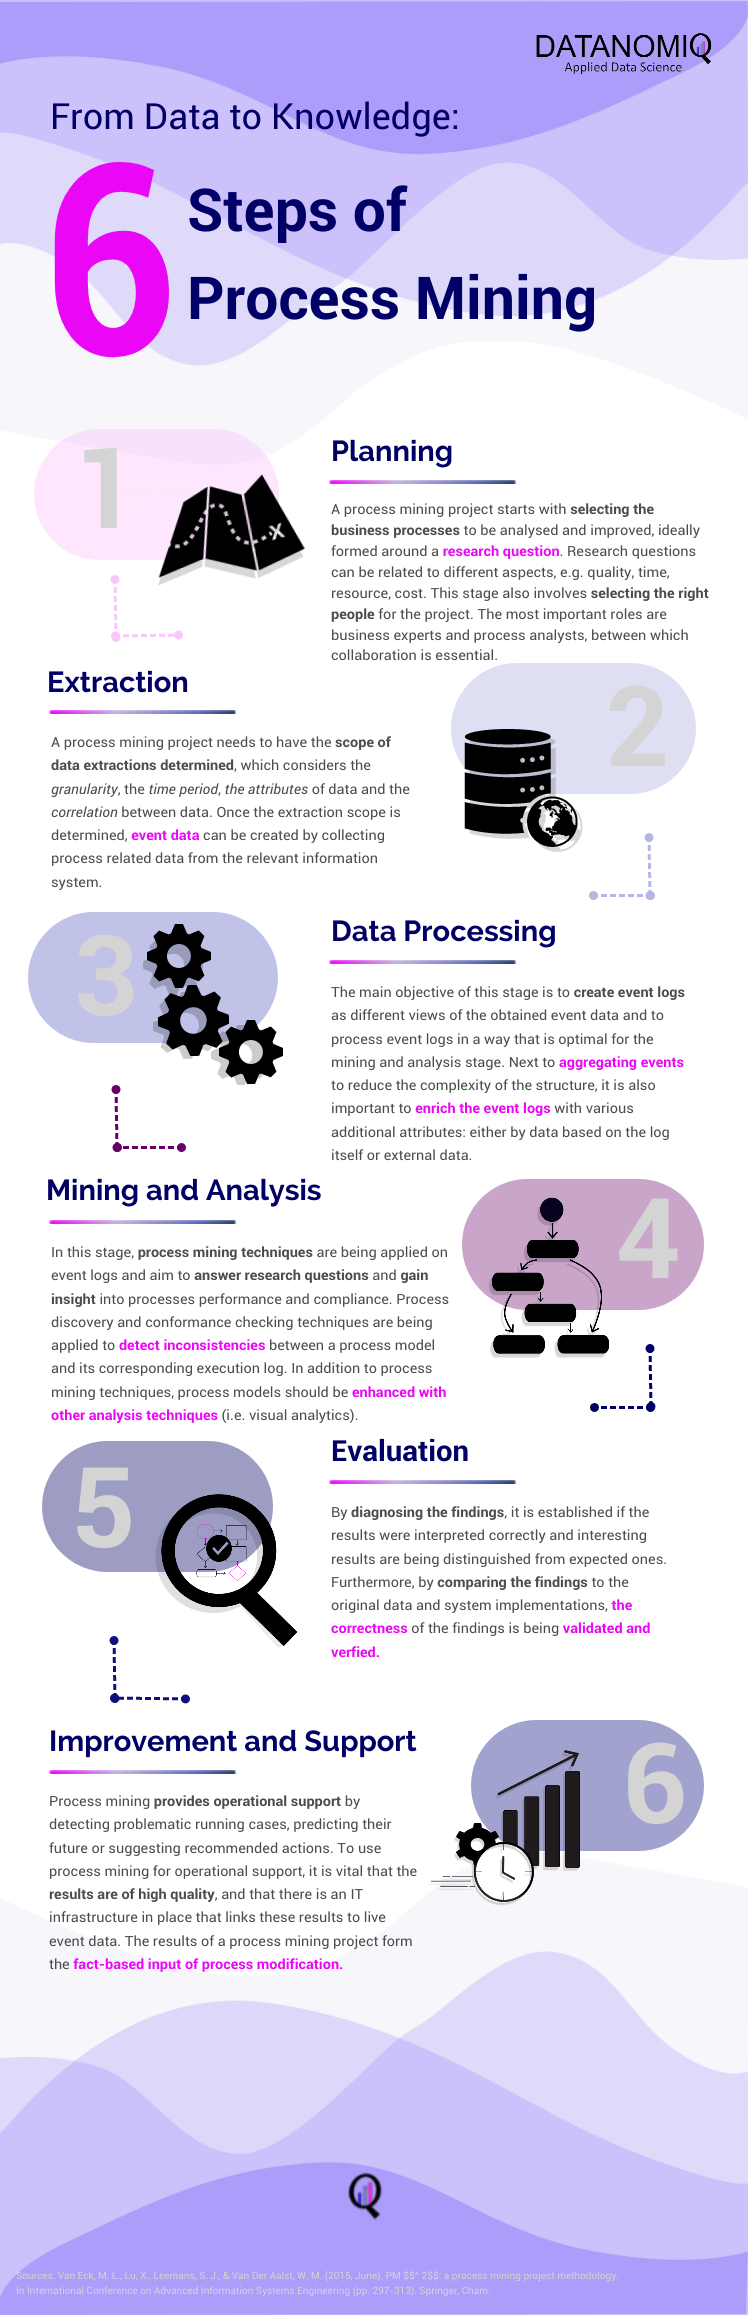 DATANOMIQ Process Mining How-To Infographic